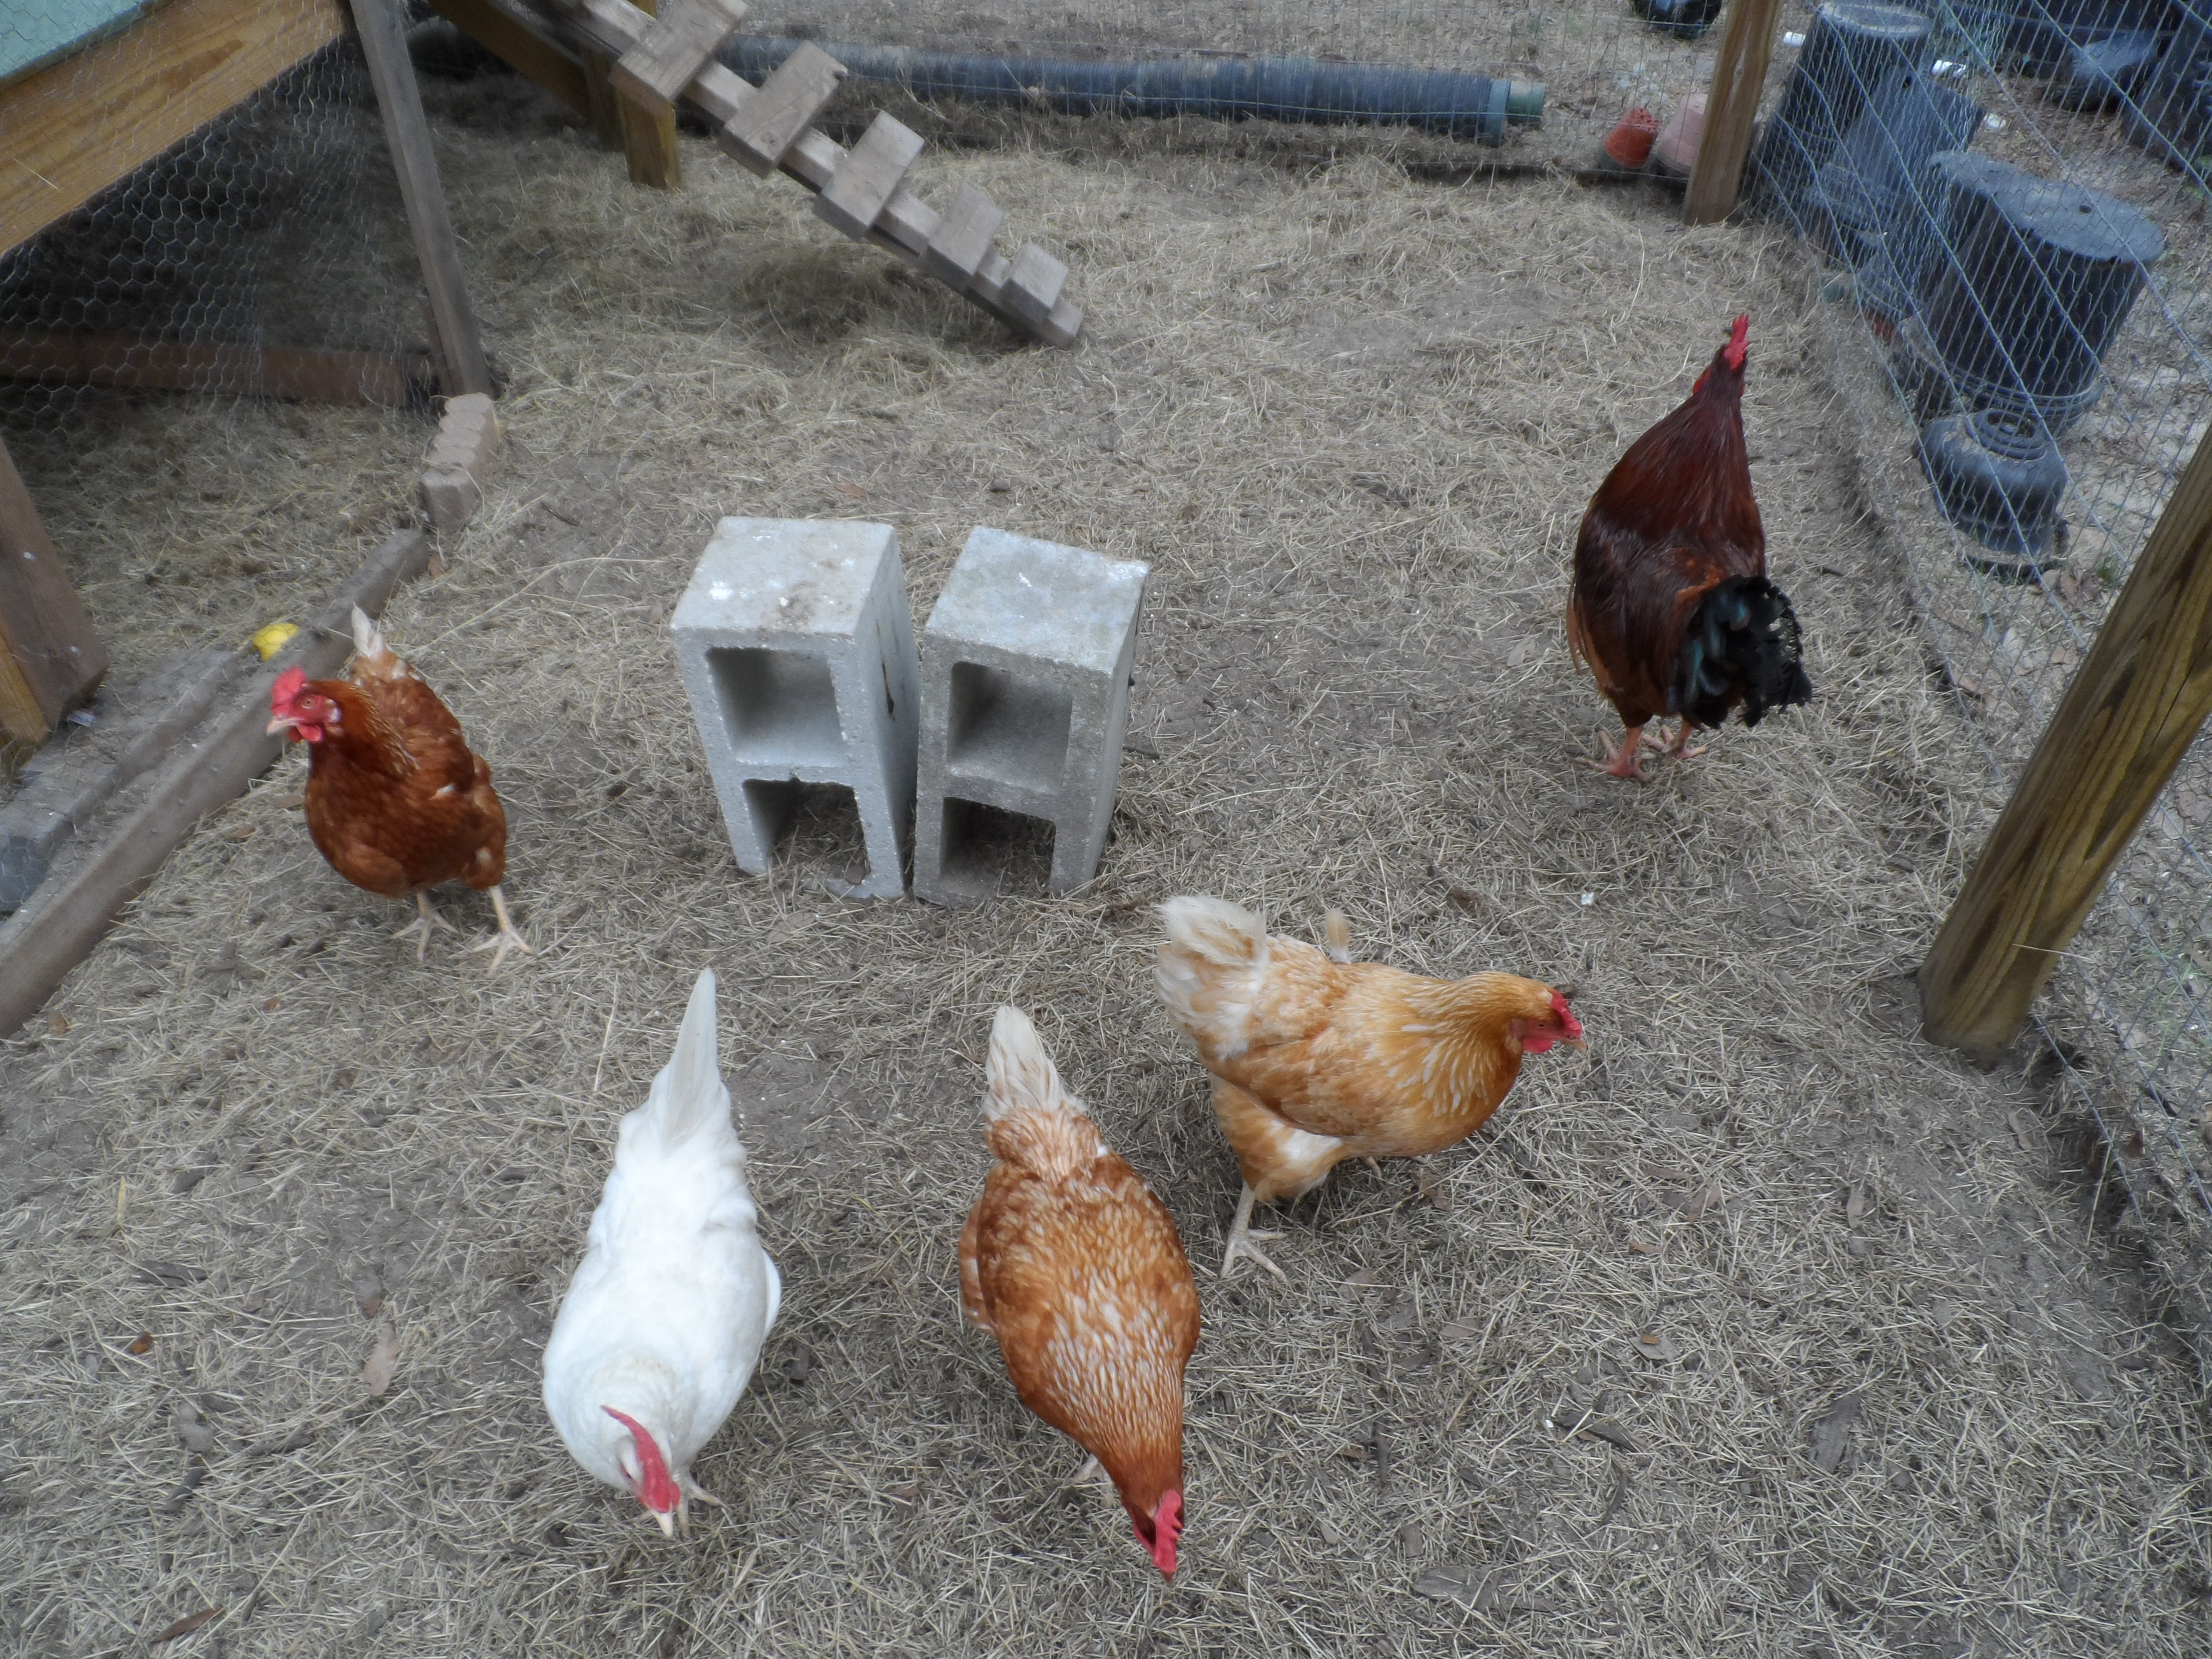 5 of our six hens.